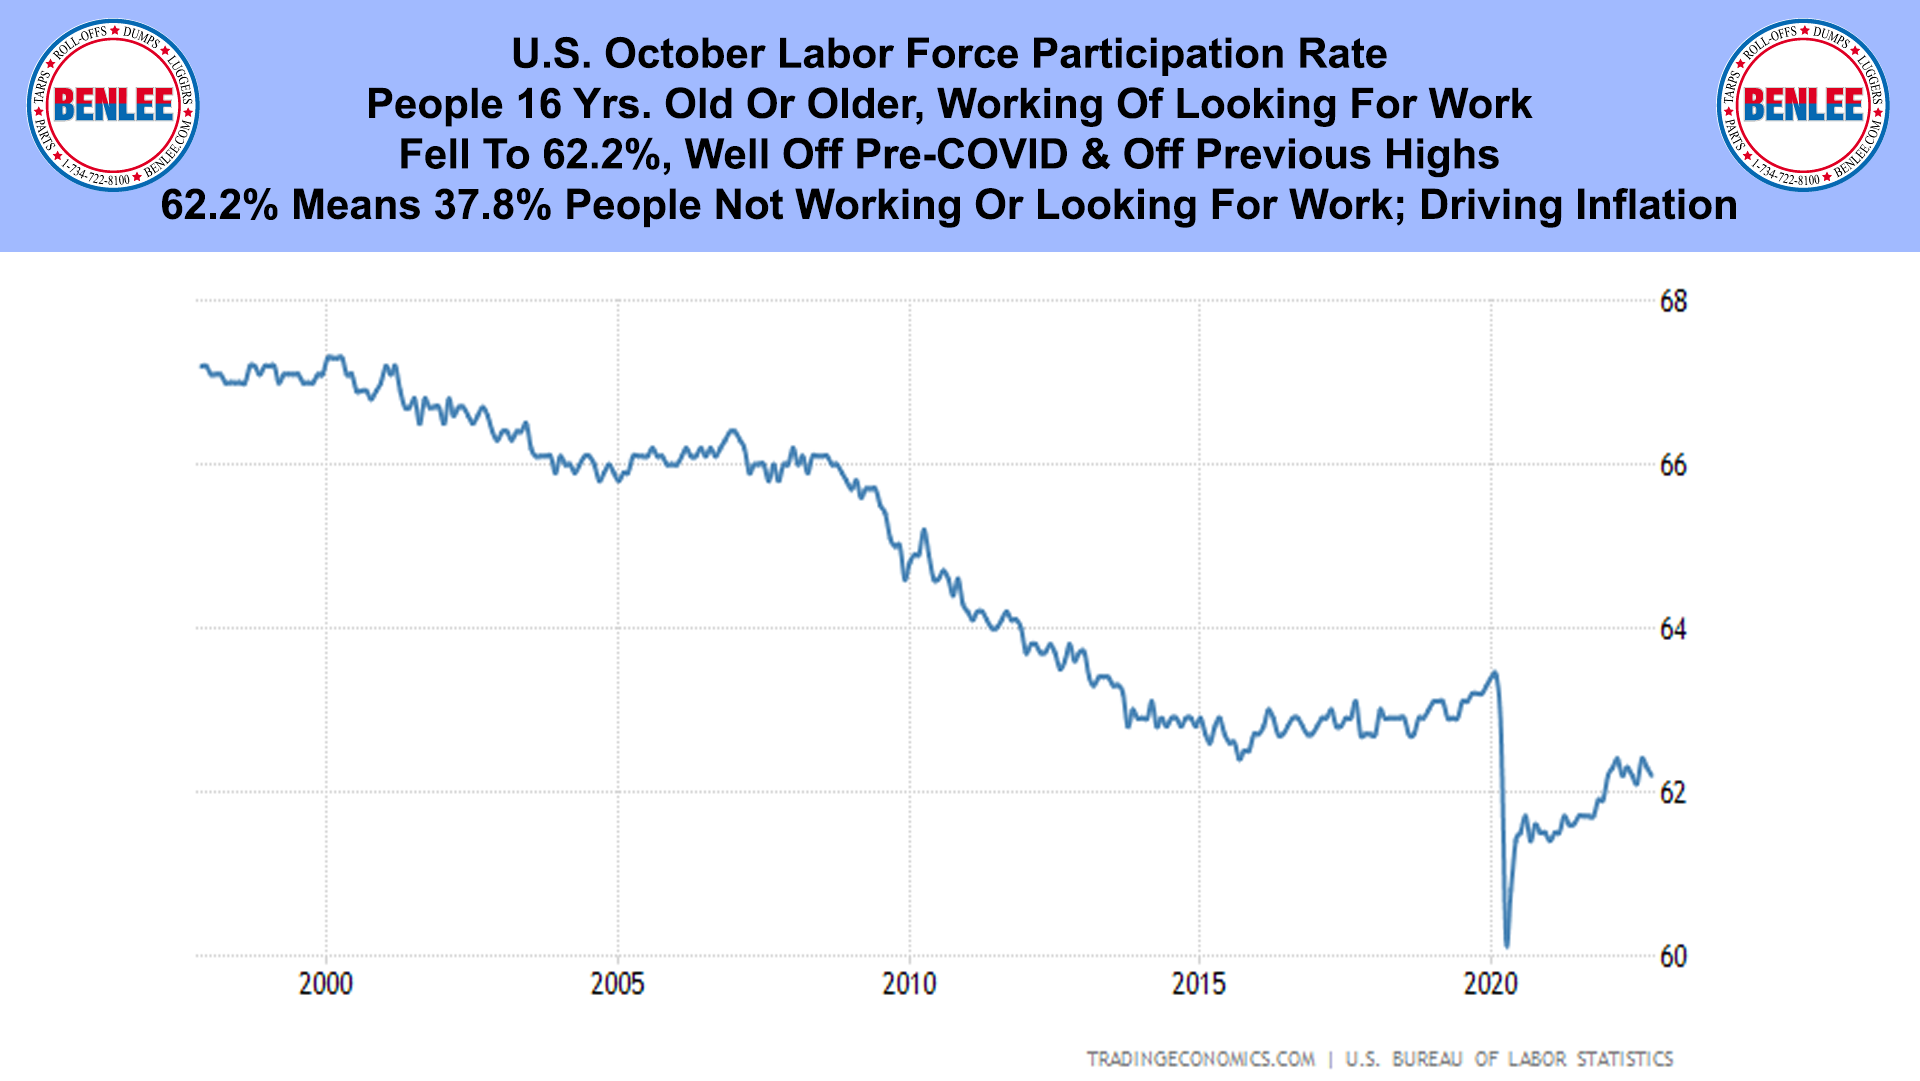 U.S. October Labor Force Participation Rate